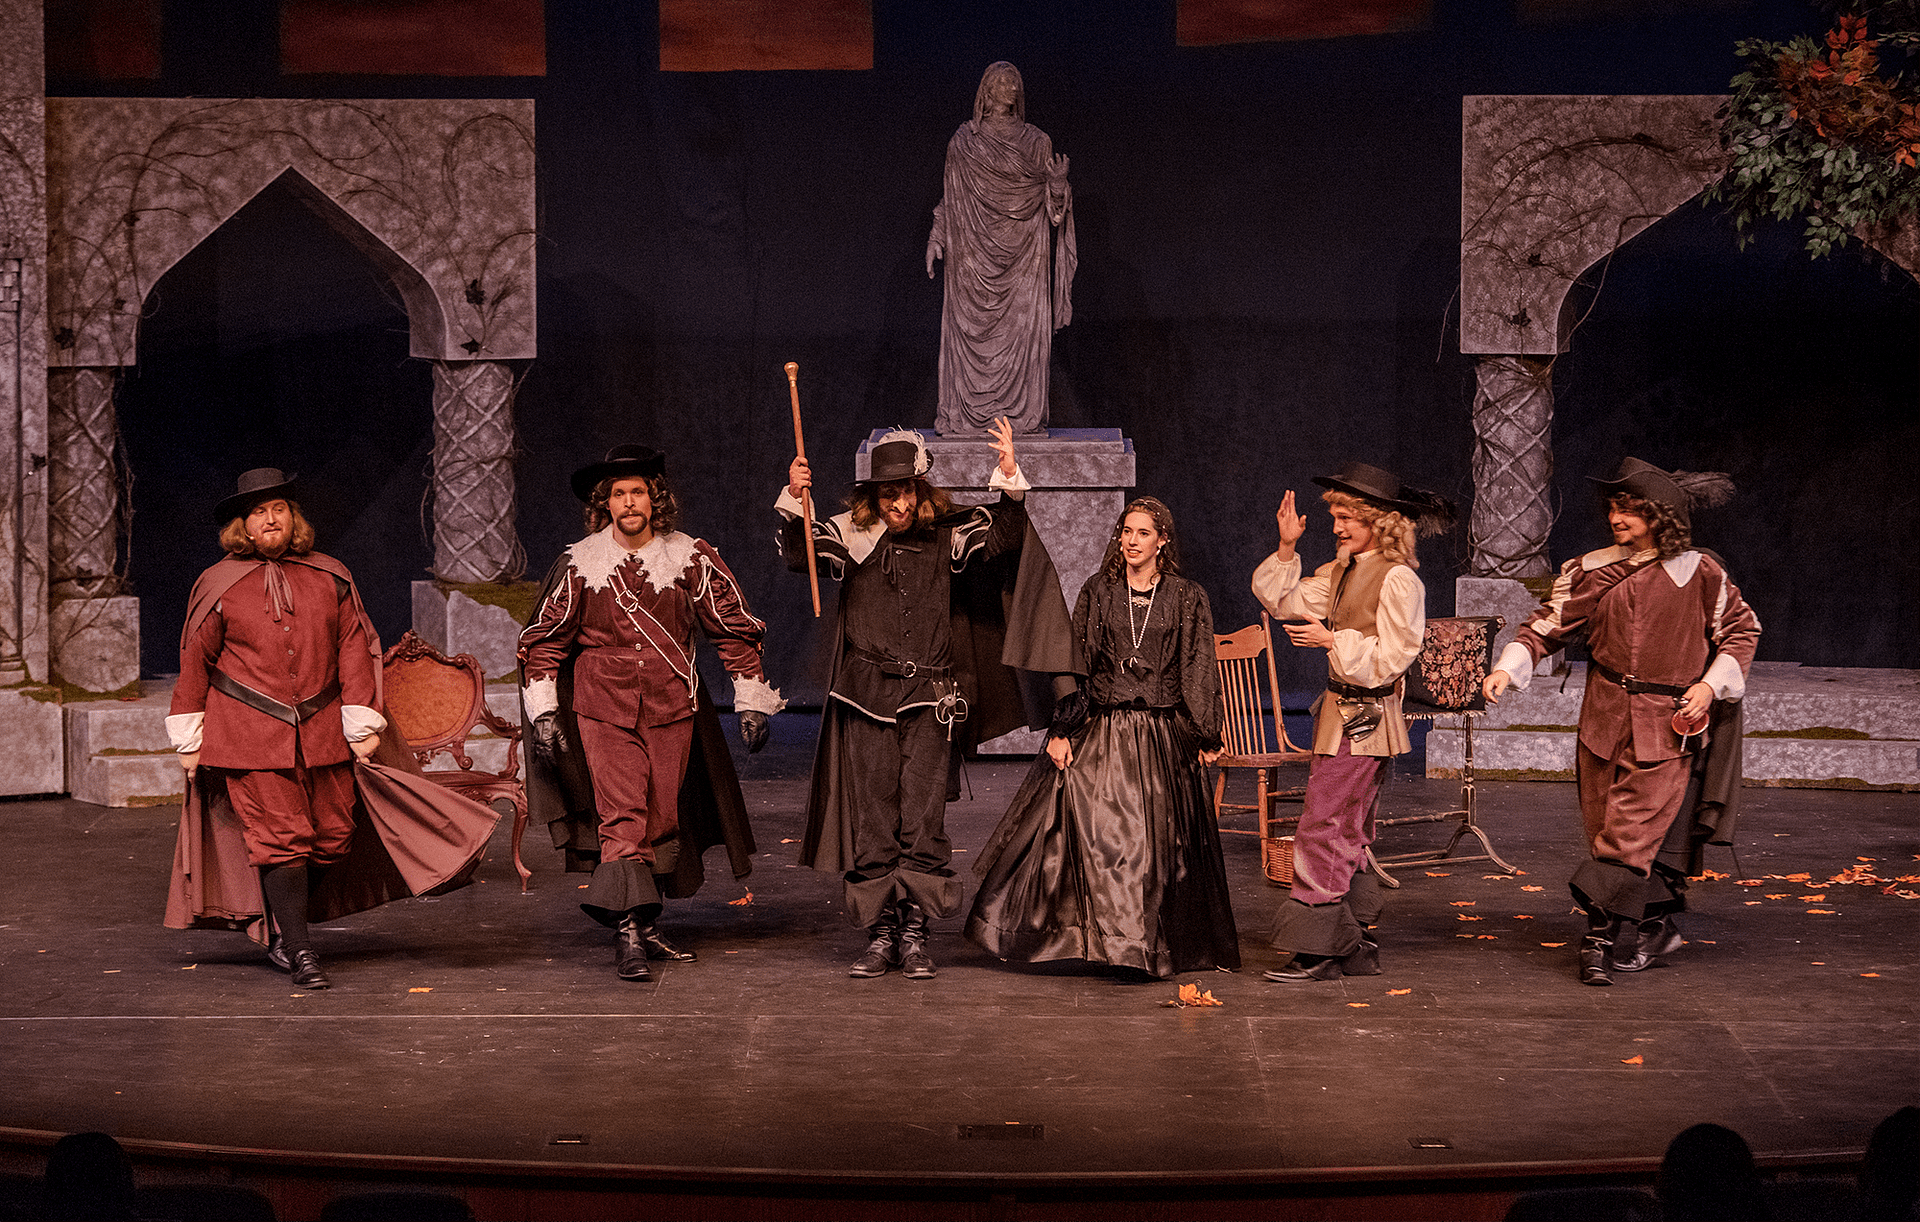 The cast bows and receives applause